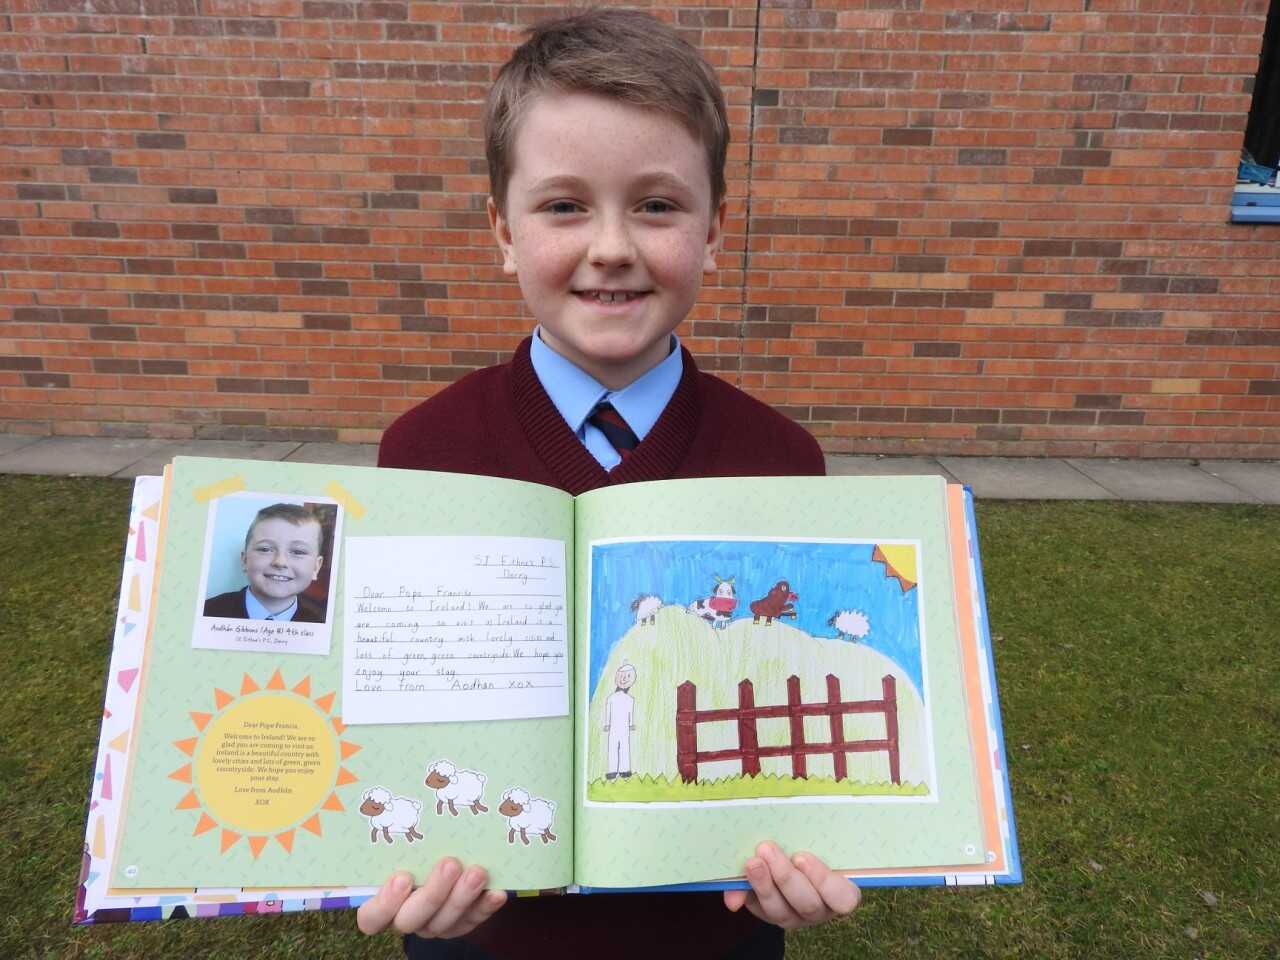 Derry Pupil Aodhan's Letter of Welcome chosen for 'Fáilte Pope Francis' Book